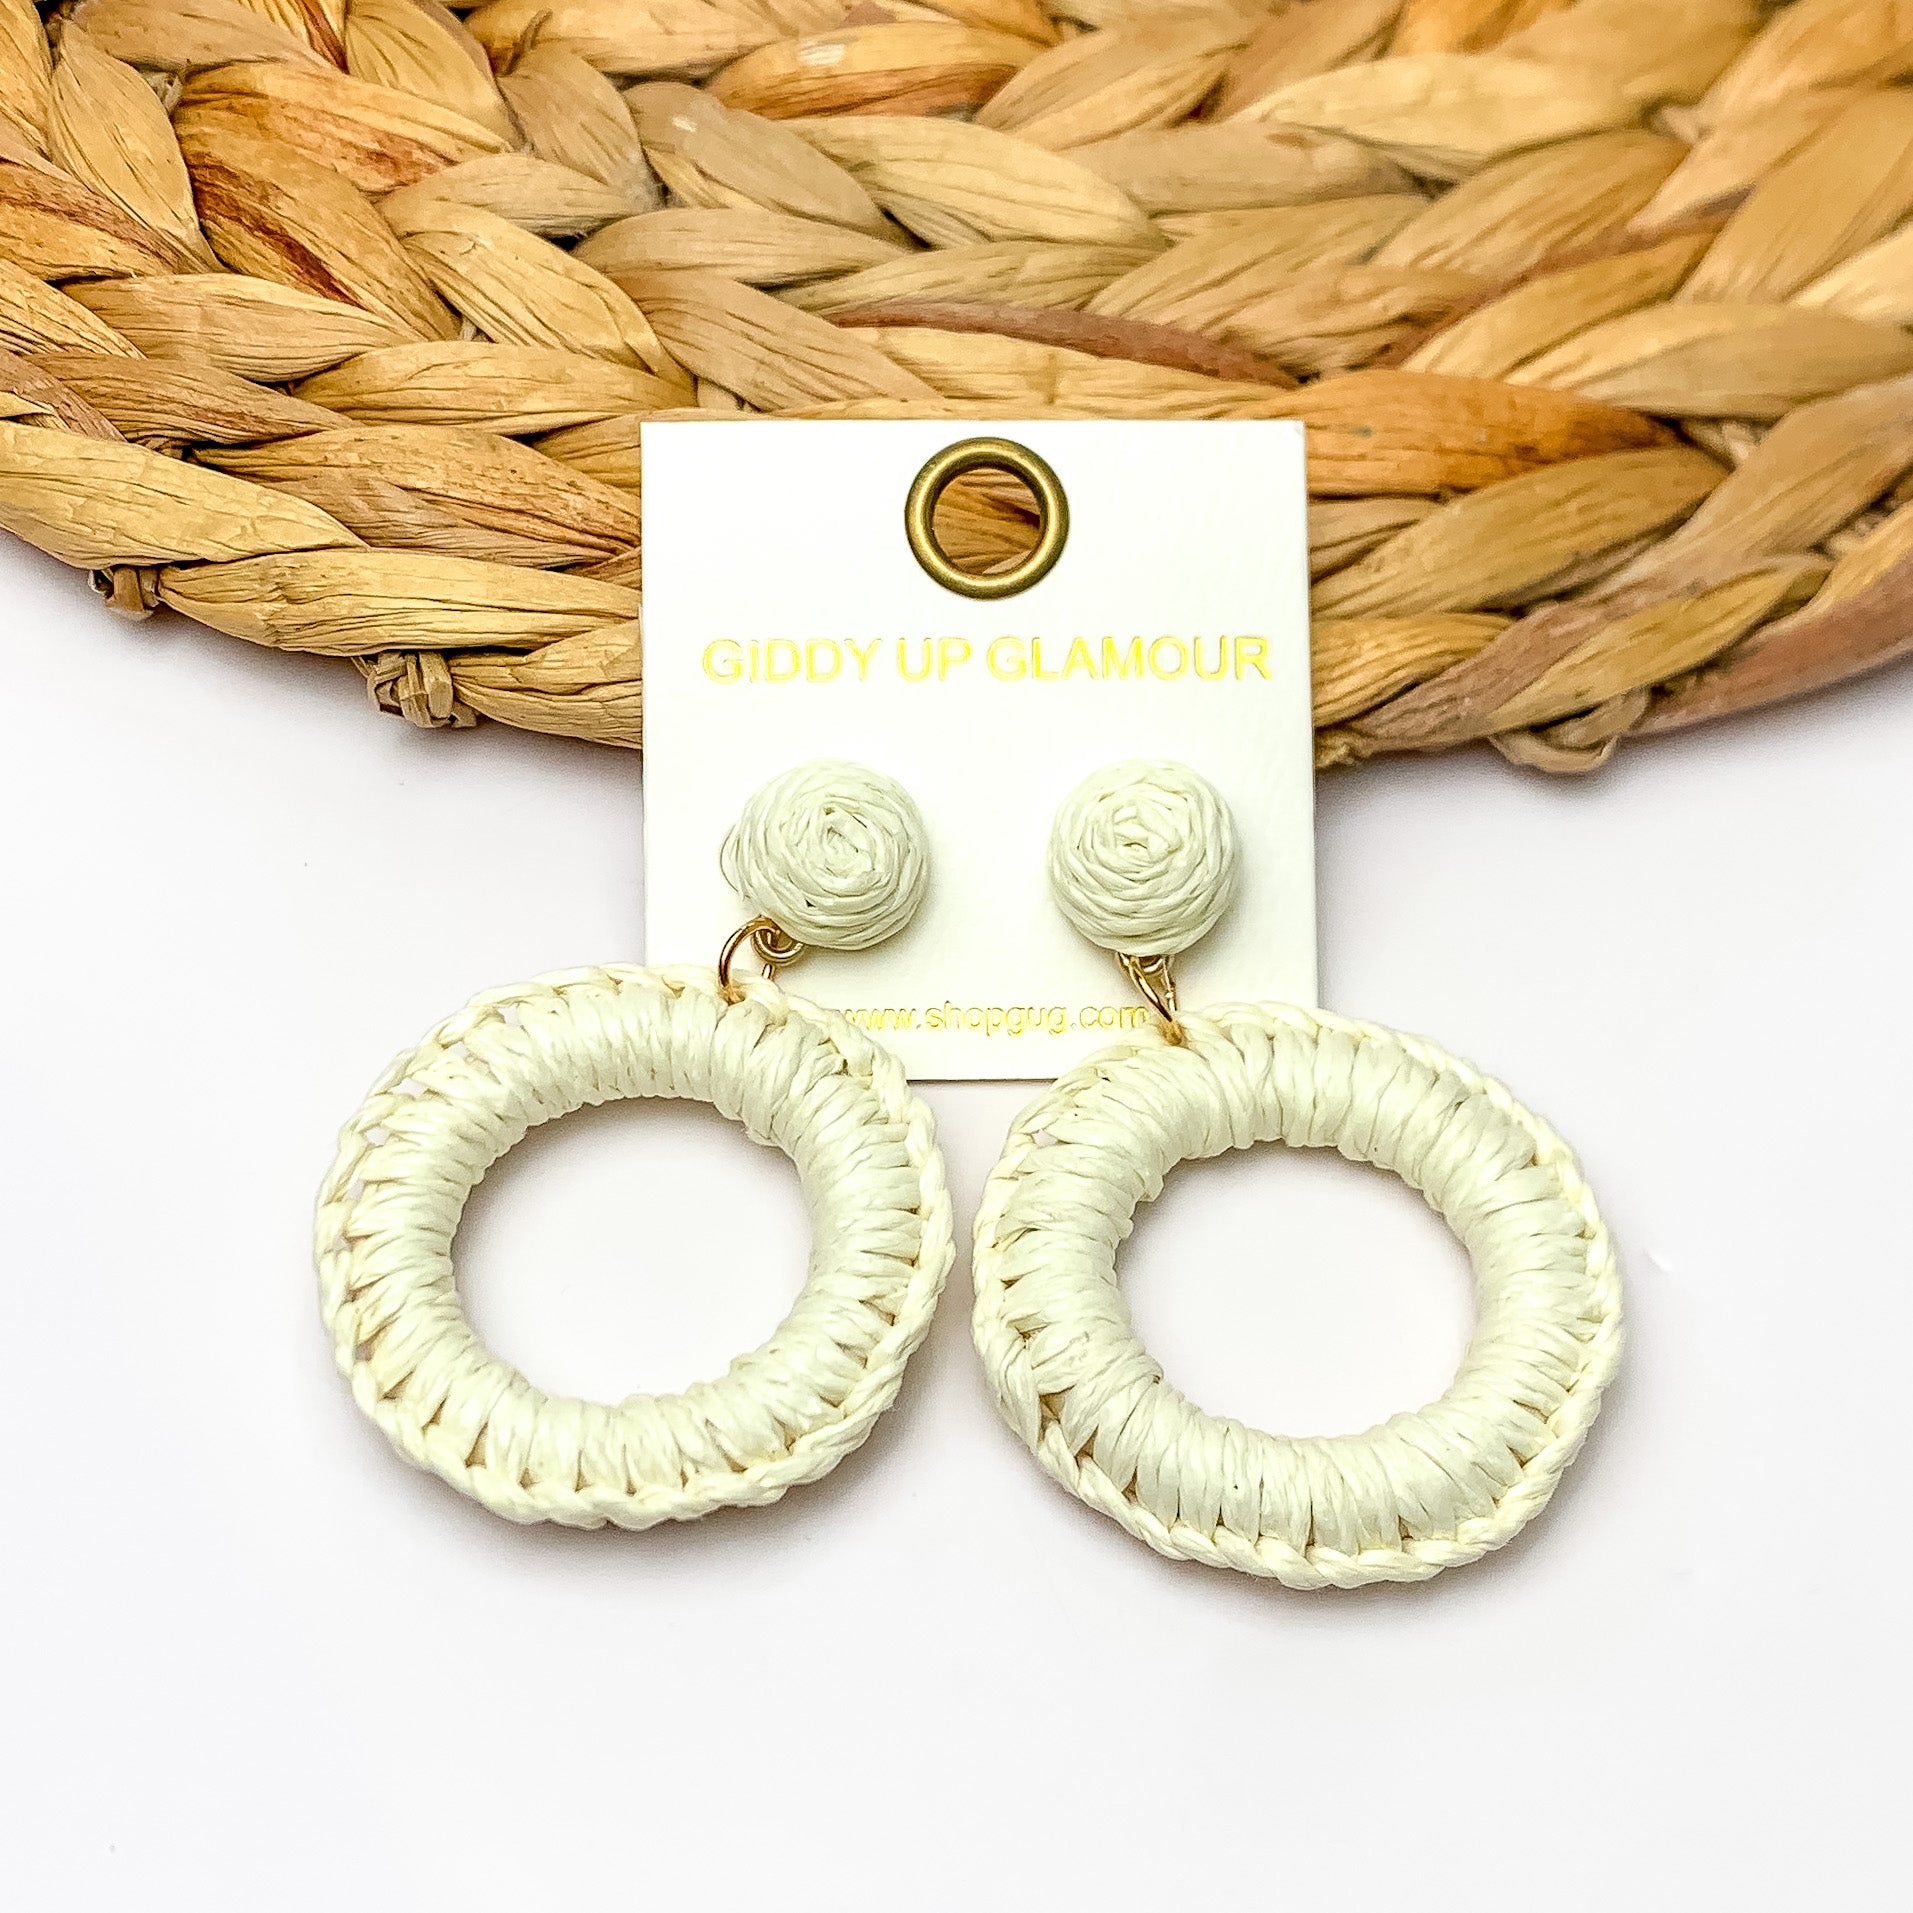 Beachside Café Raffia Wrapped Circle Earrings in Ivory White. Pictured on a white background with the top of the earrings laying on a brown circle decorative piece.